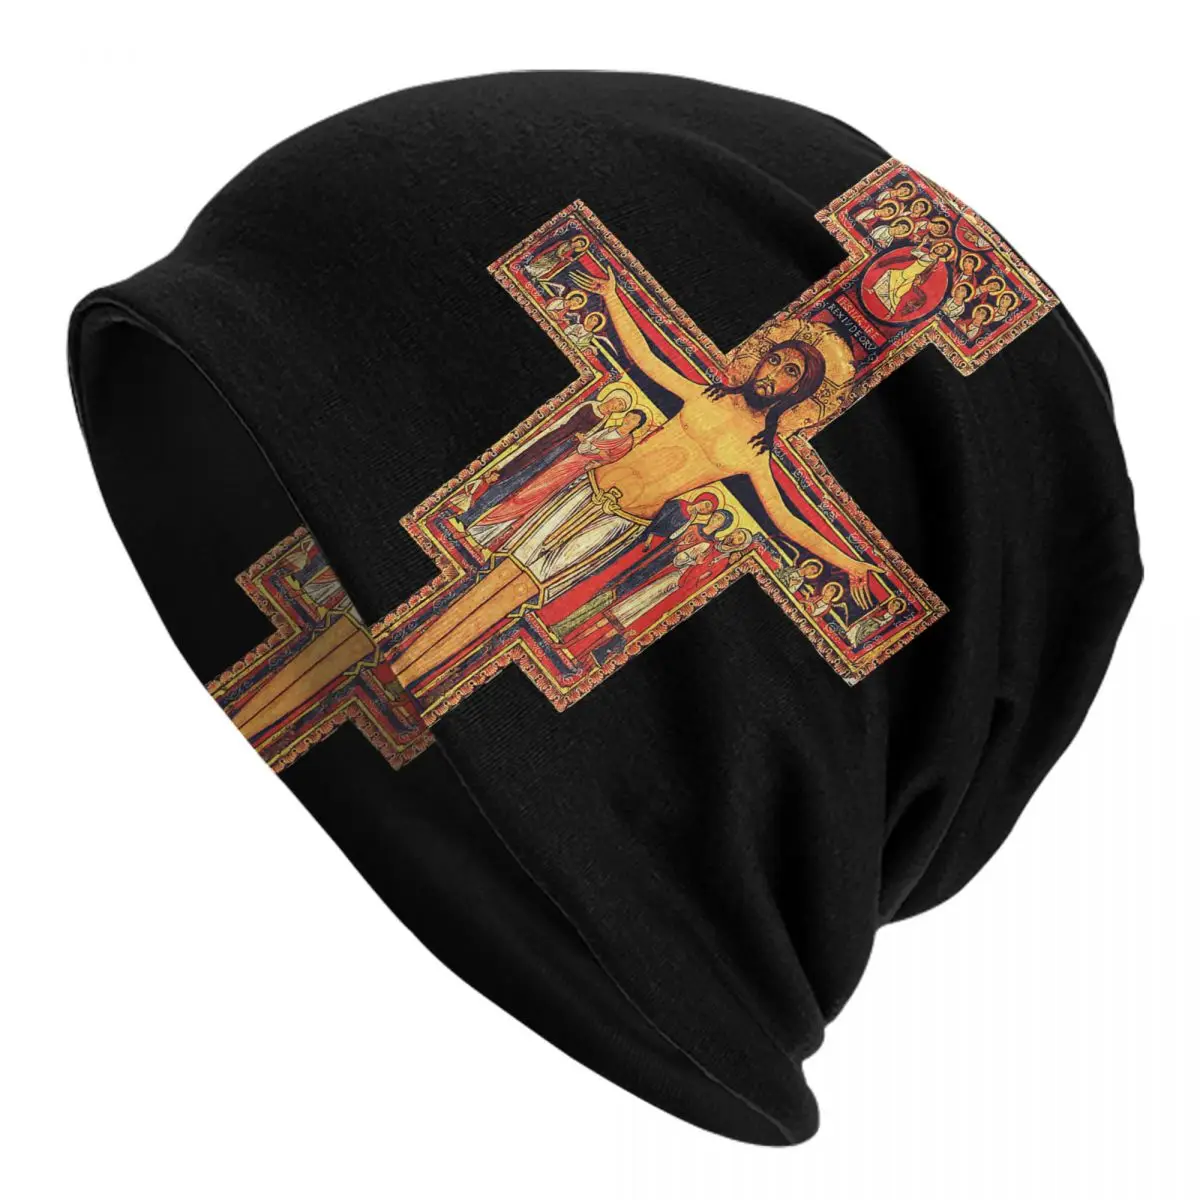 San Damiano Cross Adult Men's Women's Knit Hat Keep warm winter Funny knitted hat